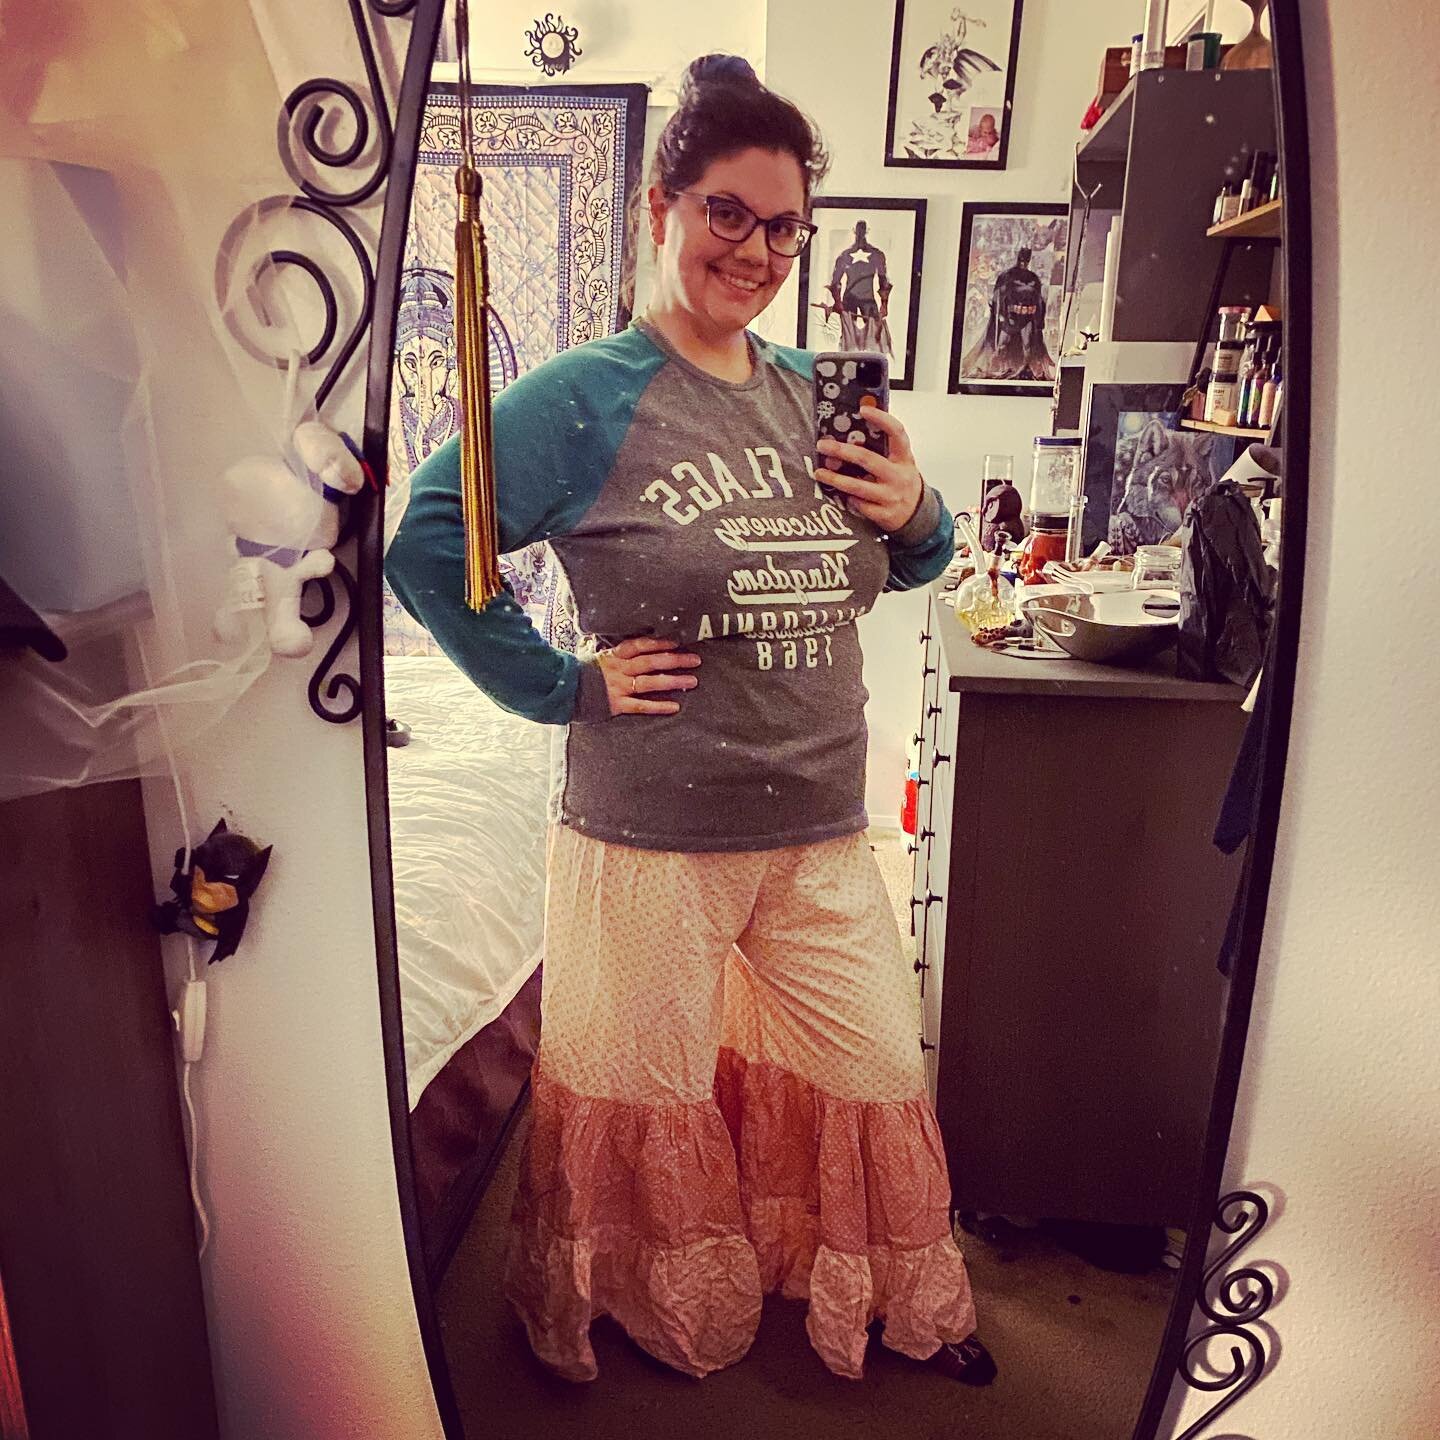 My partner doesn&rsquo;t know what to make of my sugar-britches... his face has run the gamut of expression in trying to process these pant skirts. All I know is that they&rsquo;re comfortable, and my friend made them, and also they make me happy ☺️
